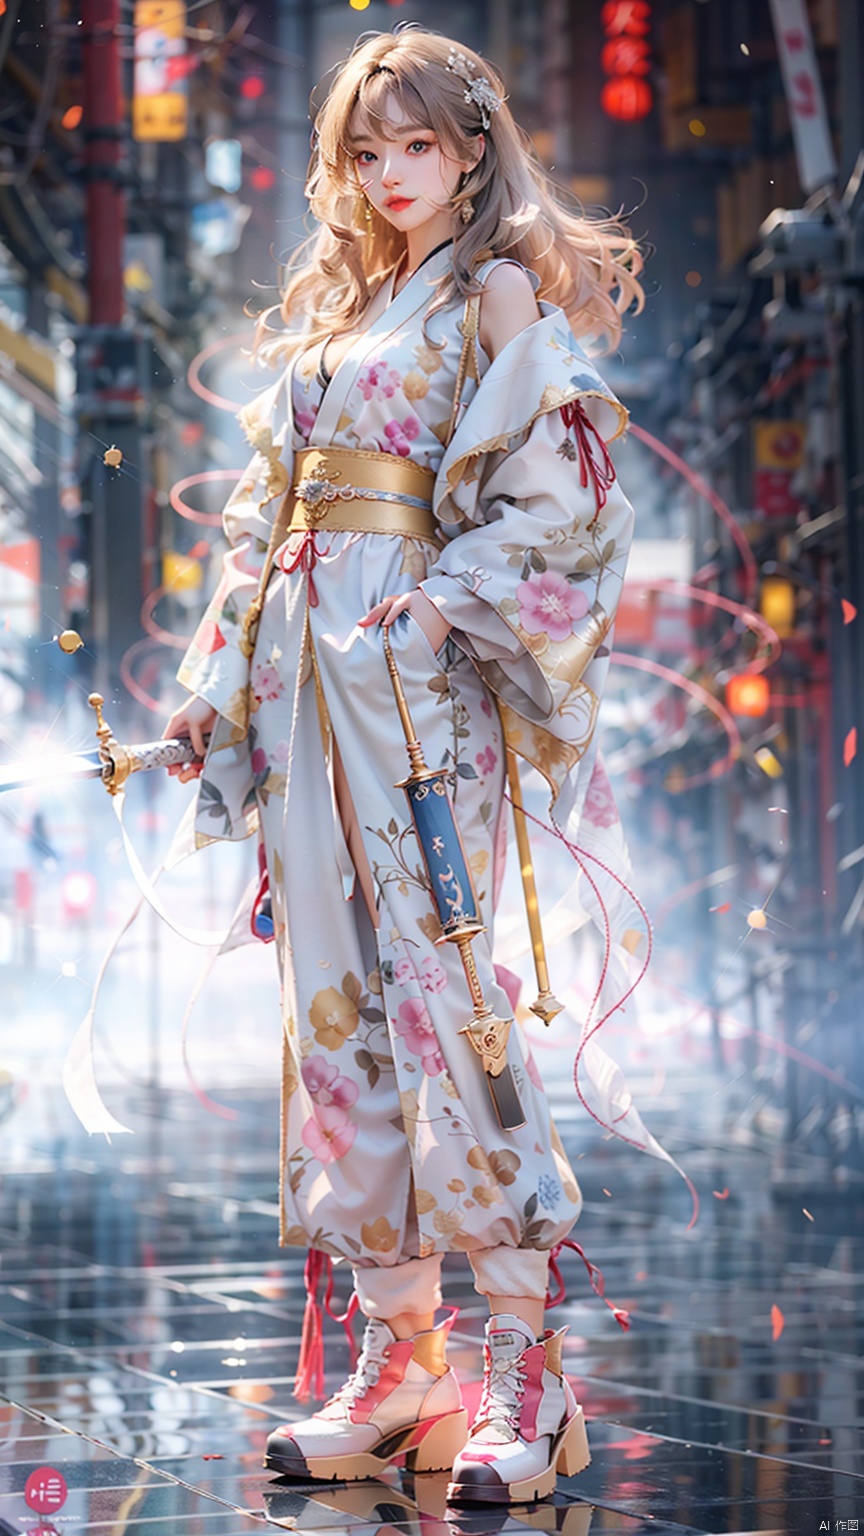 1 girl, holding a Japanese sword, not looking at the camera, three-dimensional facial features, Asian face, bangs, long hair, solo, blue eyes, holding, glow, robot, mecha, science fiction, open_ Hand, movie lighting, strong contrast, high level of detail, best quality, masterpiece, spirit, crystal_ Dress, crystal, with white, blue, and silver as the main color tones Kimono, Hanfu, clouds, with a background of an Eastern dragon (with high-precision details)., long, Chinese style, sdmai